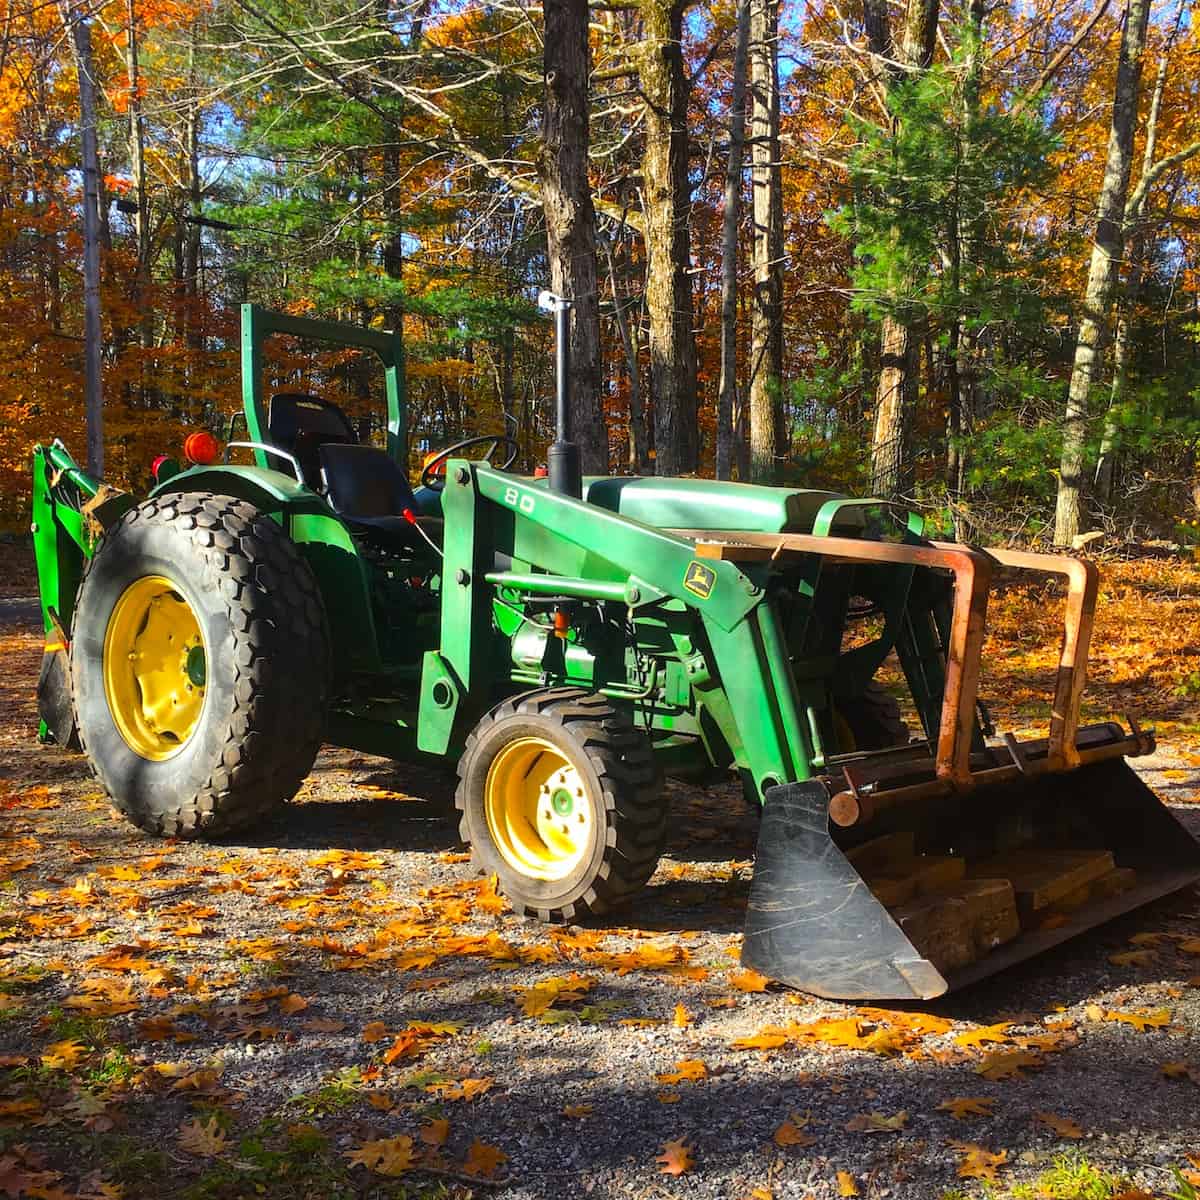 A tractor parked in a forest